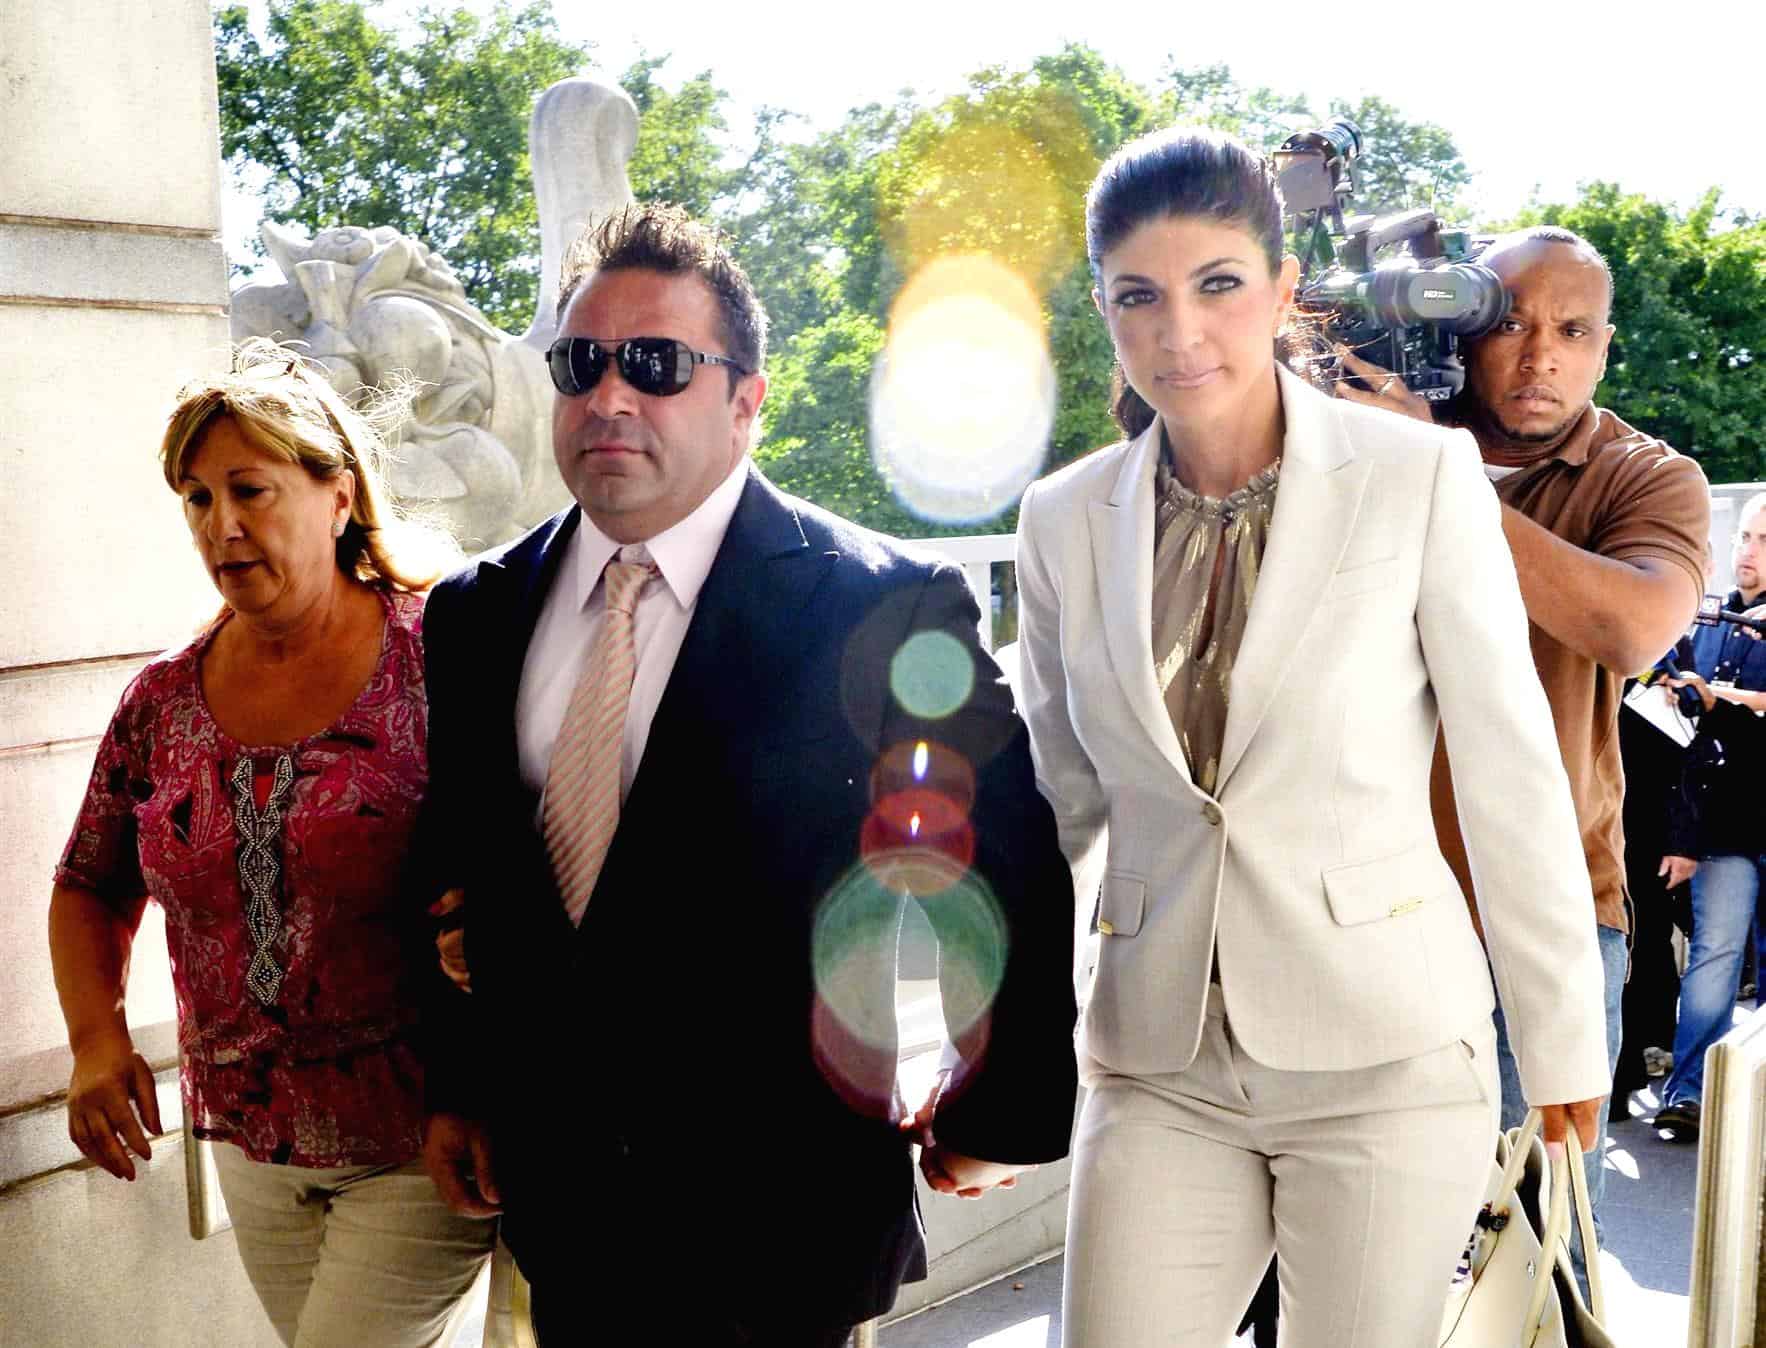 RHONJ's Joe Giudice Released from Prison and Transferred to Immigration Detention Center